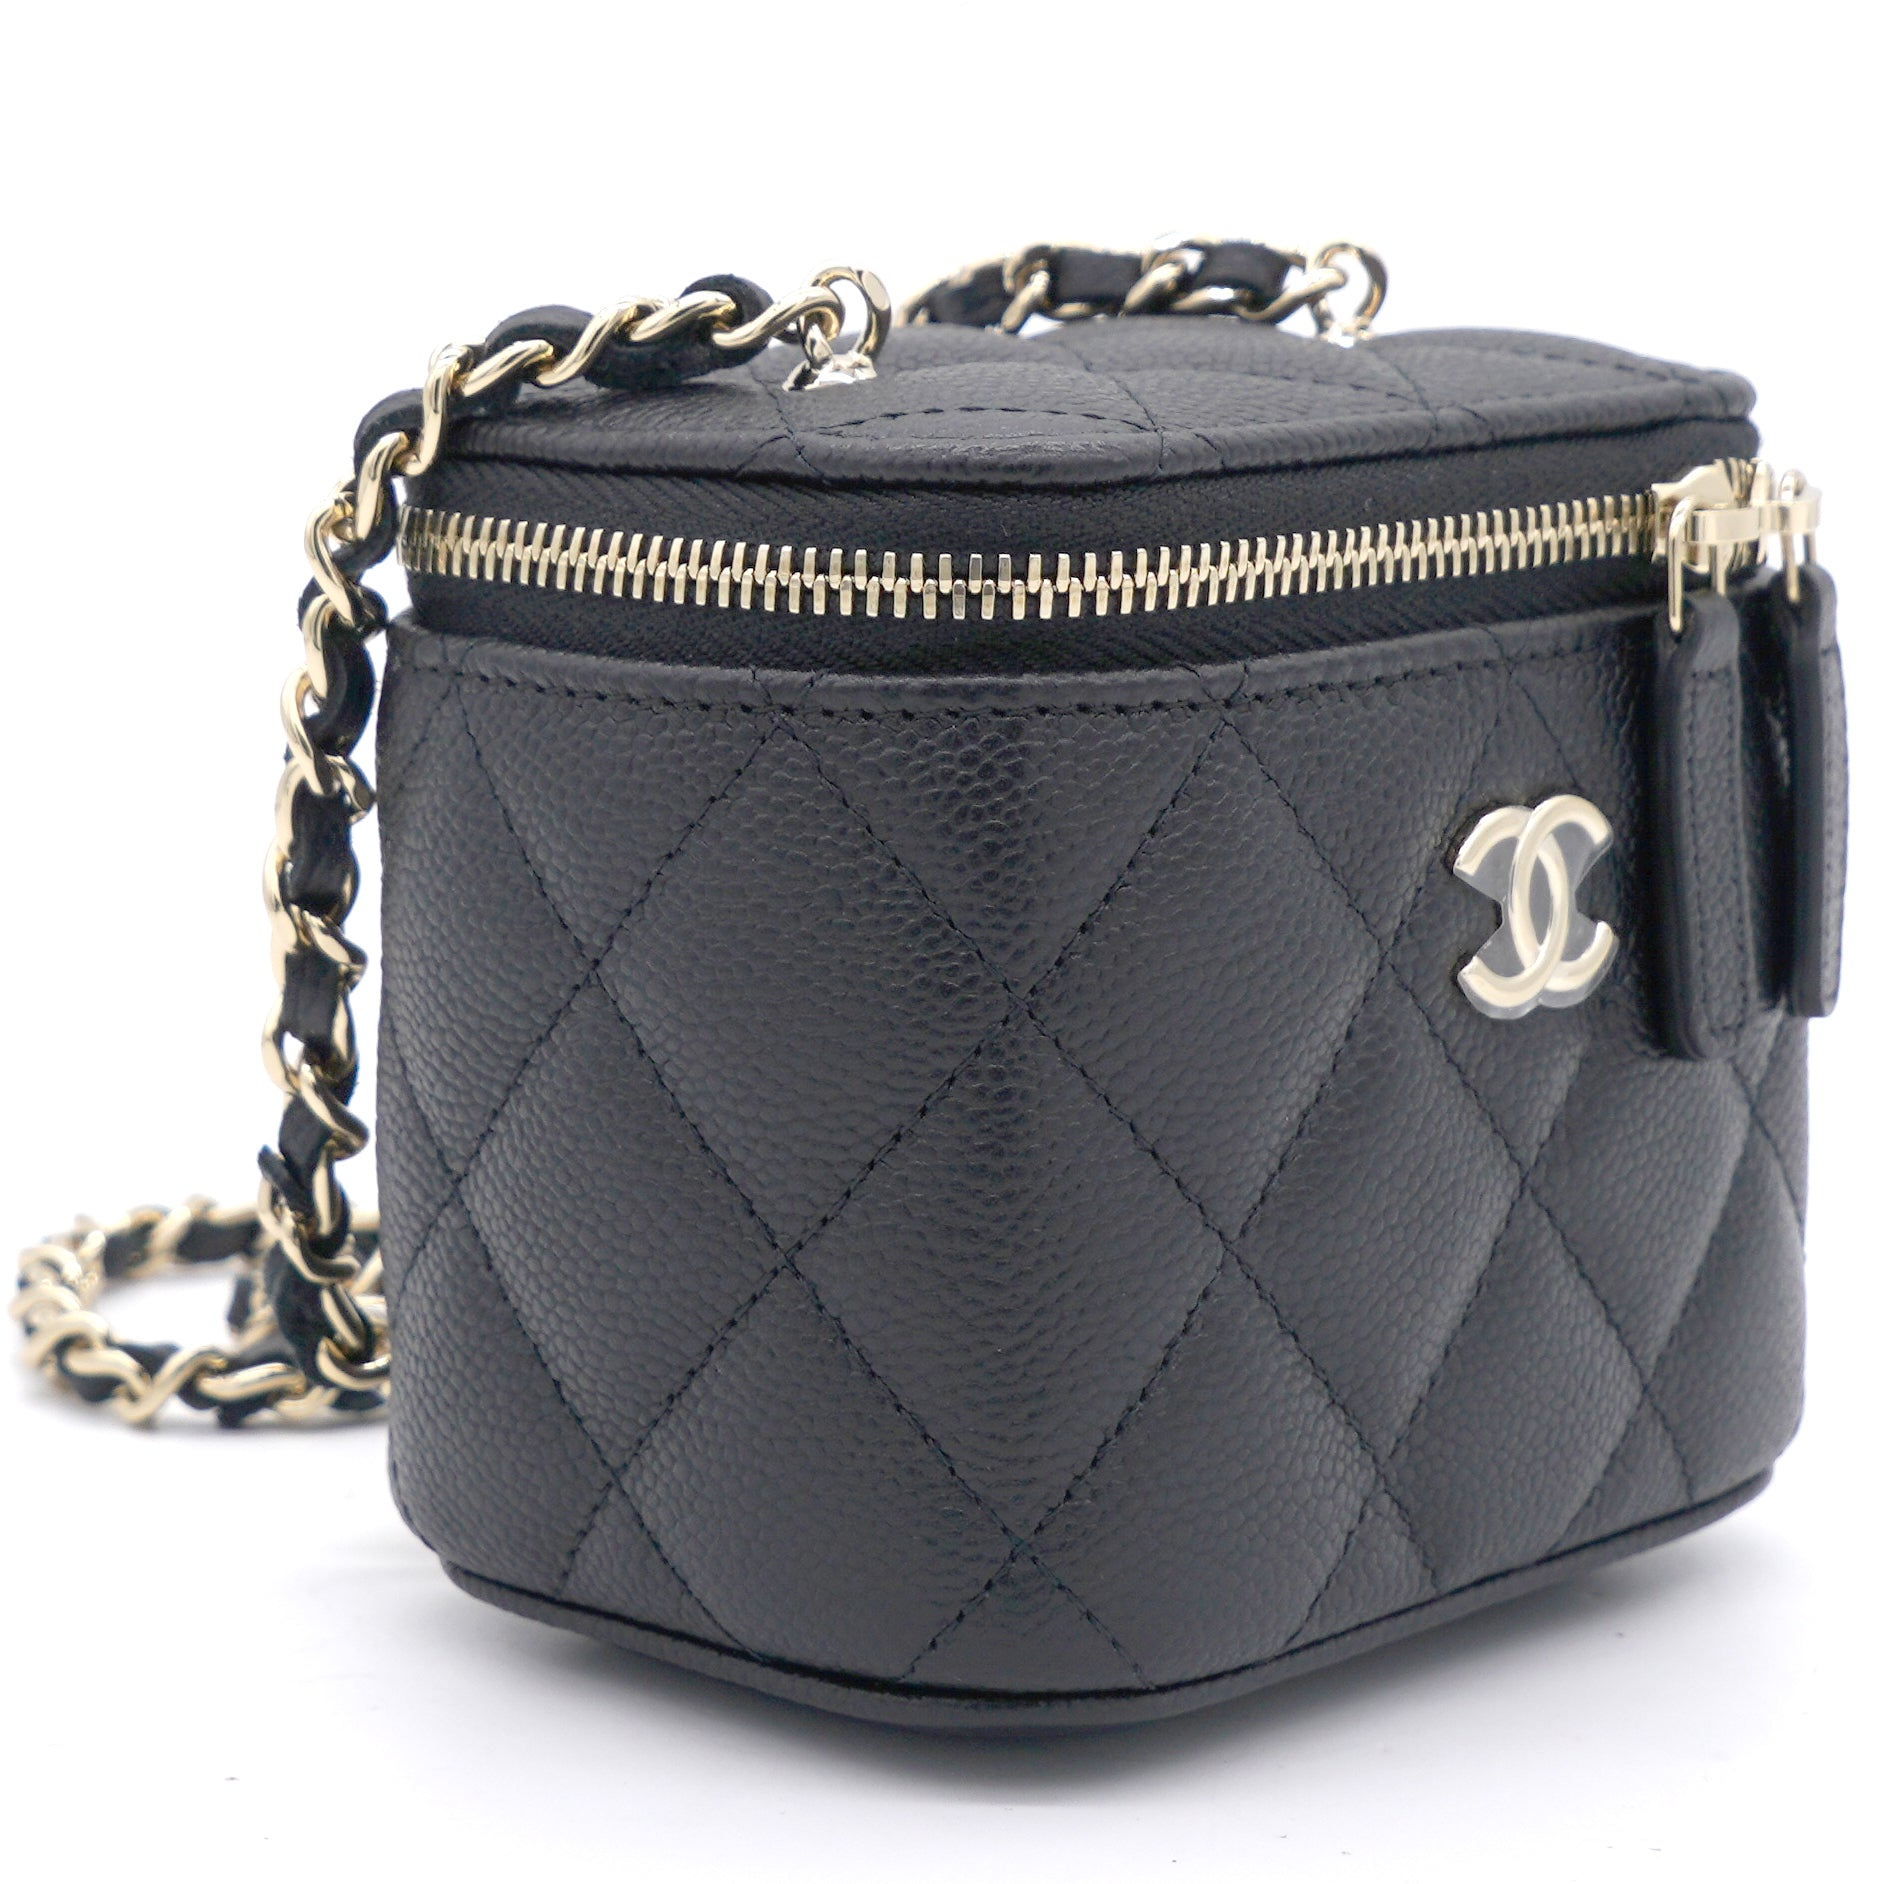 Chanel Crossbody On Sale Up To 90% Off Retail